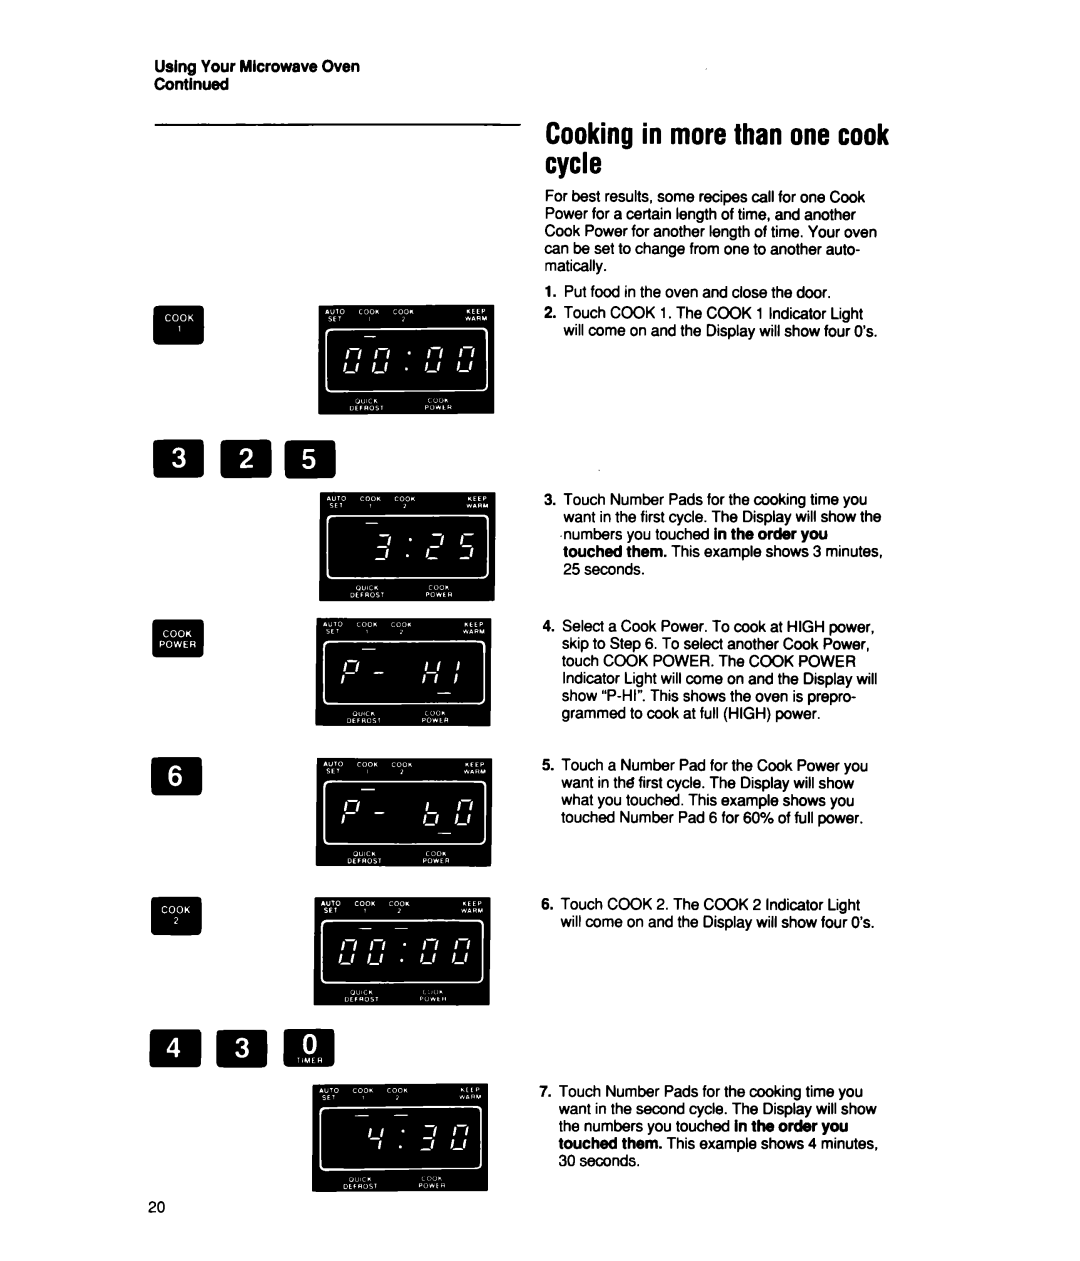 Whirlpool MS2100XW, MS2101XW manual Cooking in more than one cook cycle, Using Your Microwave Oven Continued 